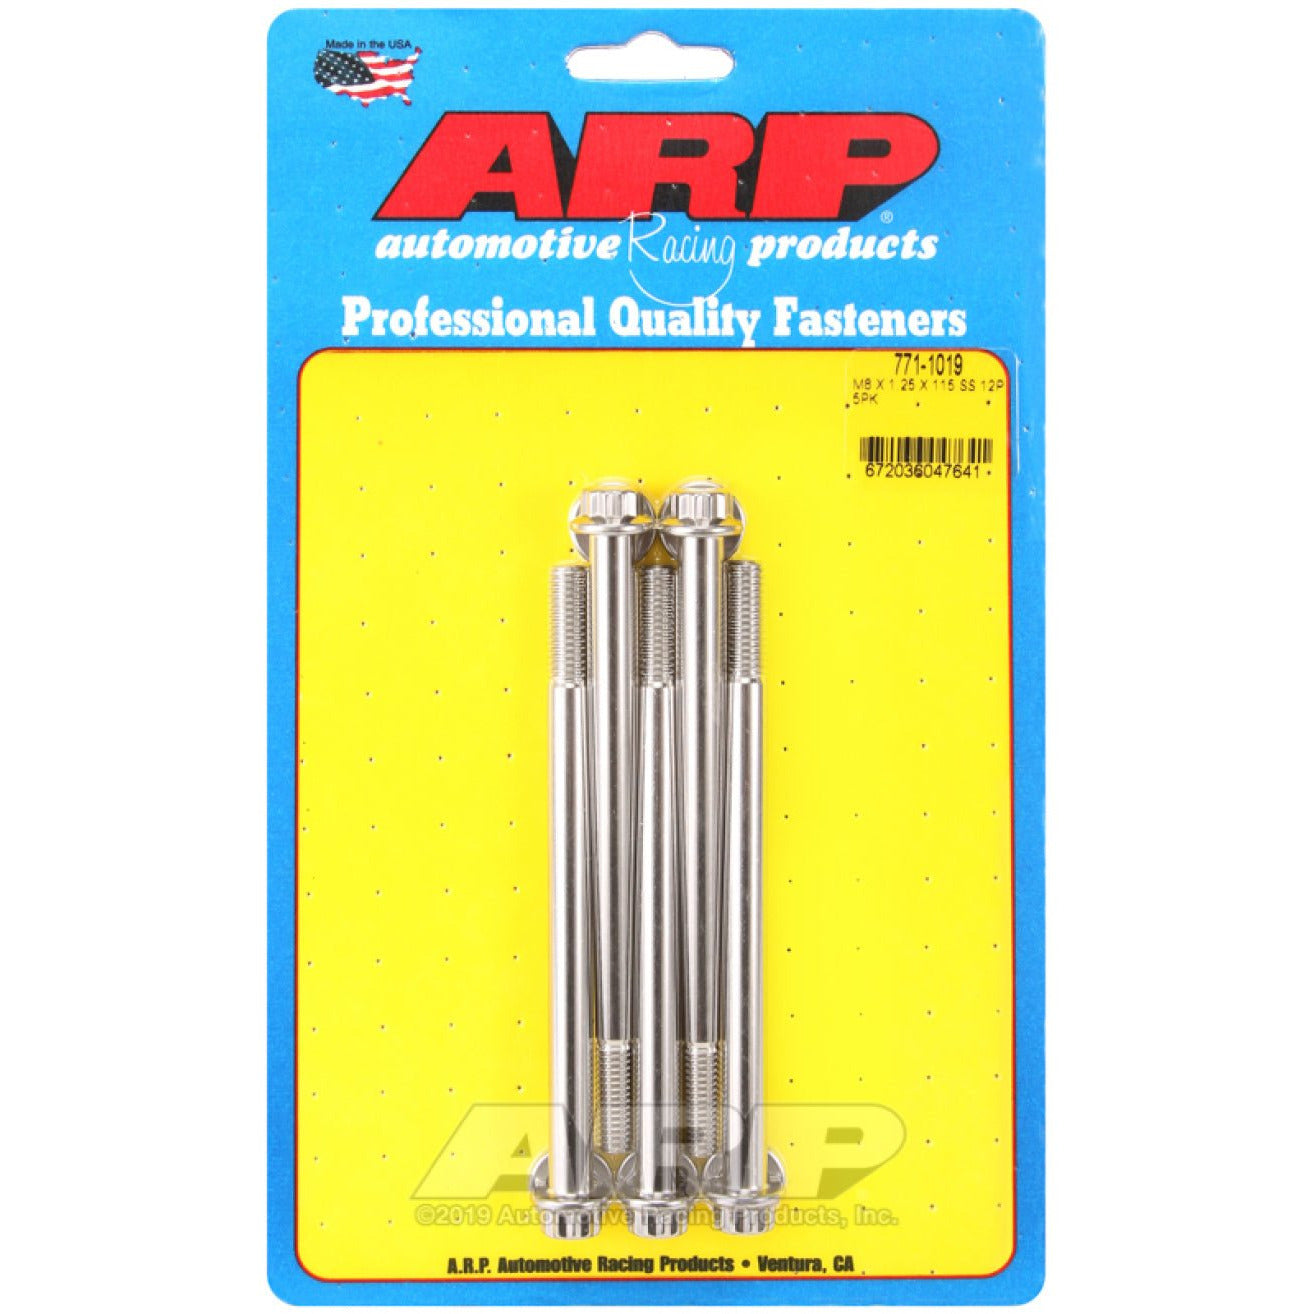 ARP M8 x 1.25 x 115 12pt Stainless Steel Bolts (5/pkg) ARP Hardware Kits - Other